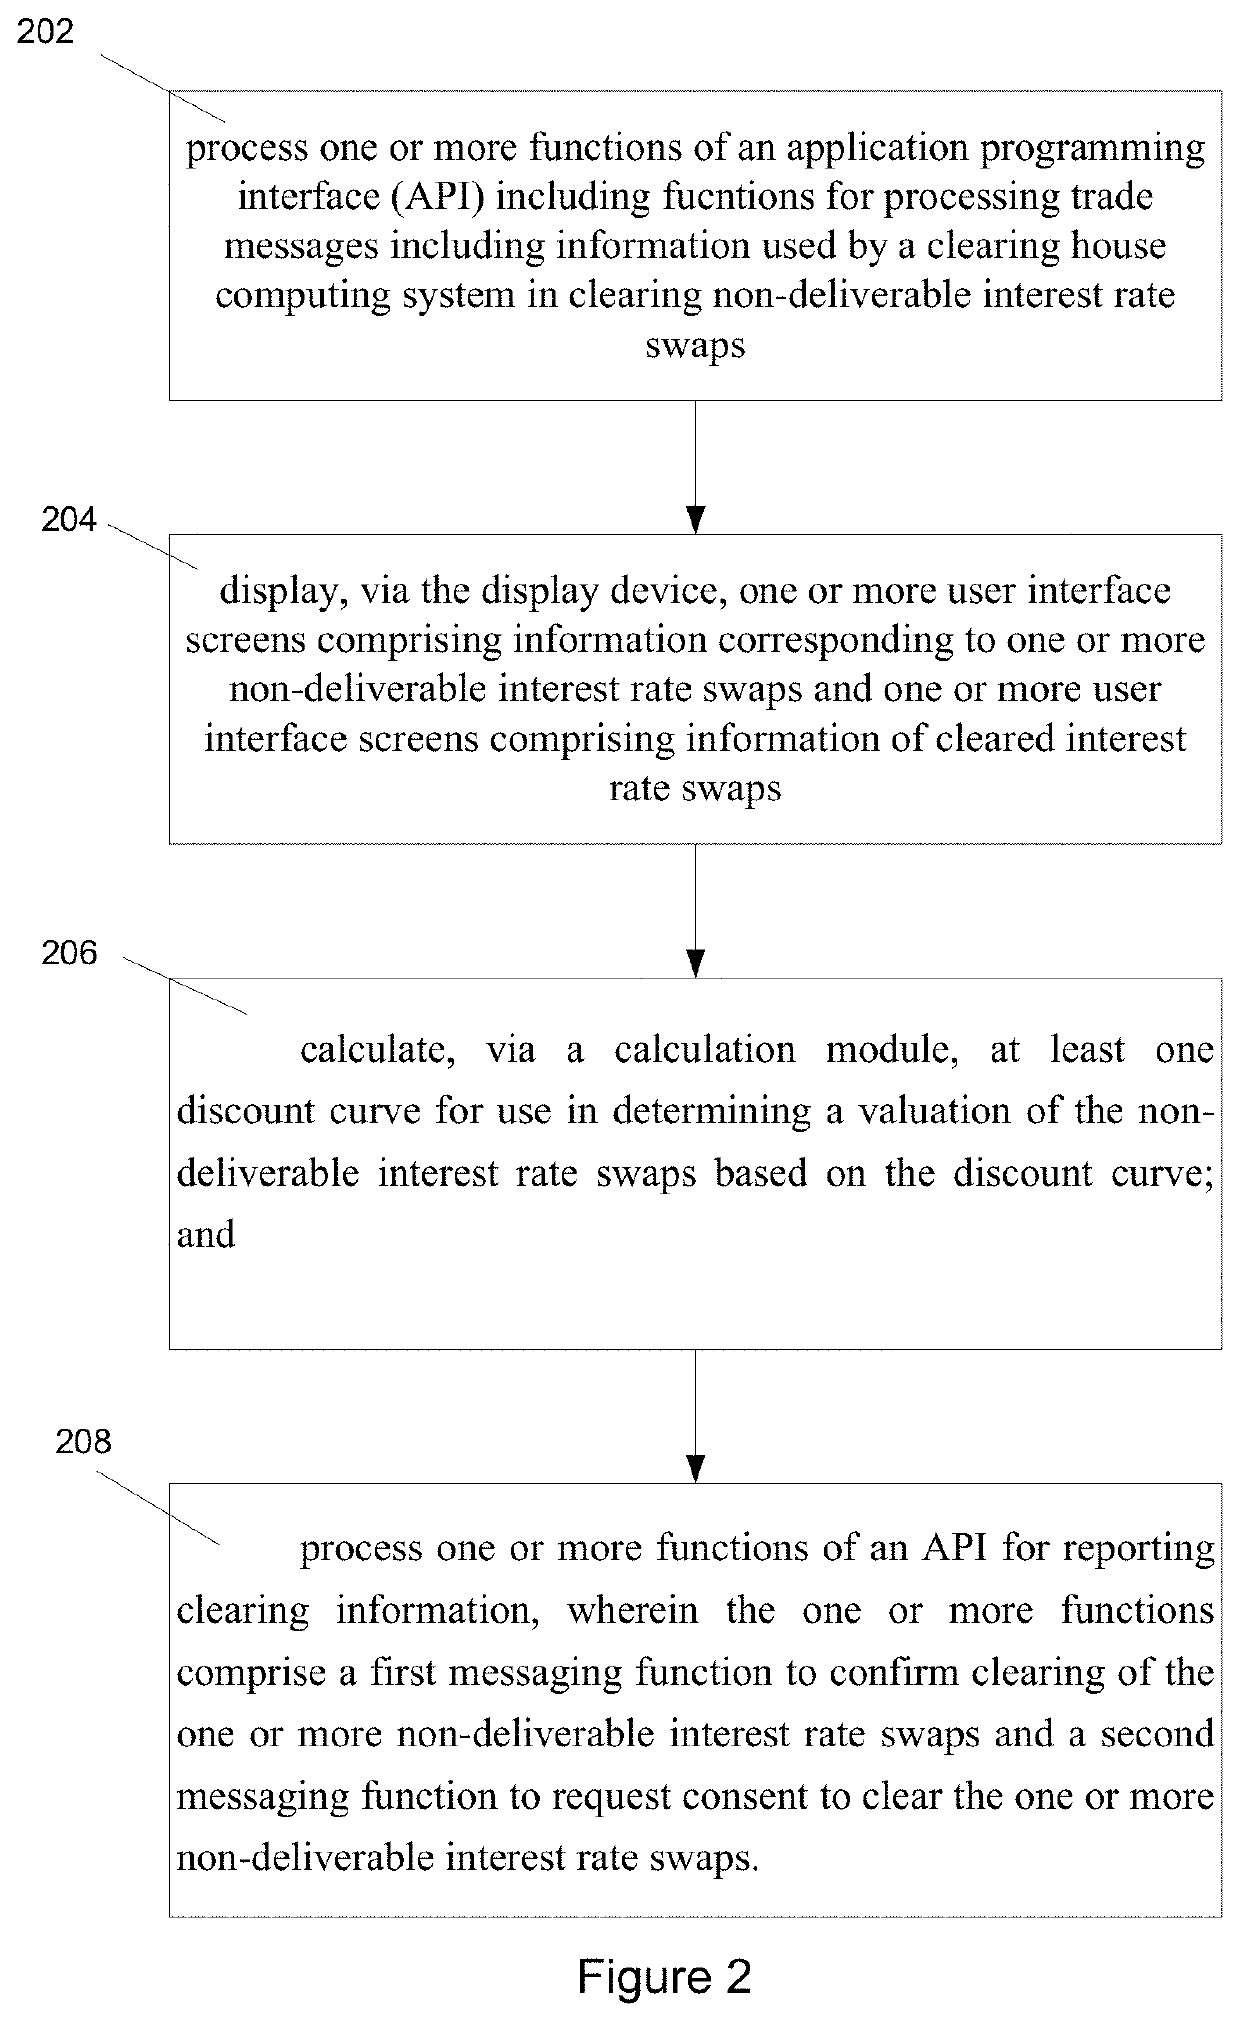 Api framework for clearing non-deliverable interest rate swaps